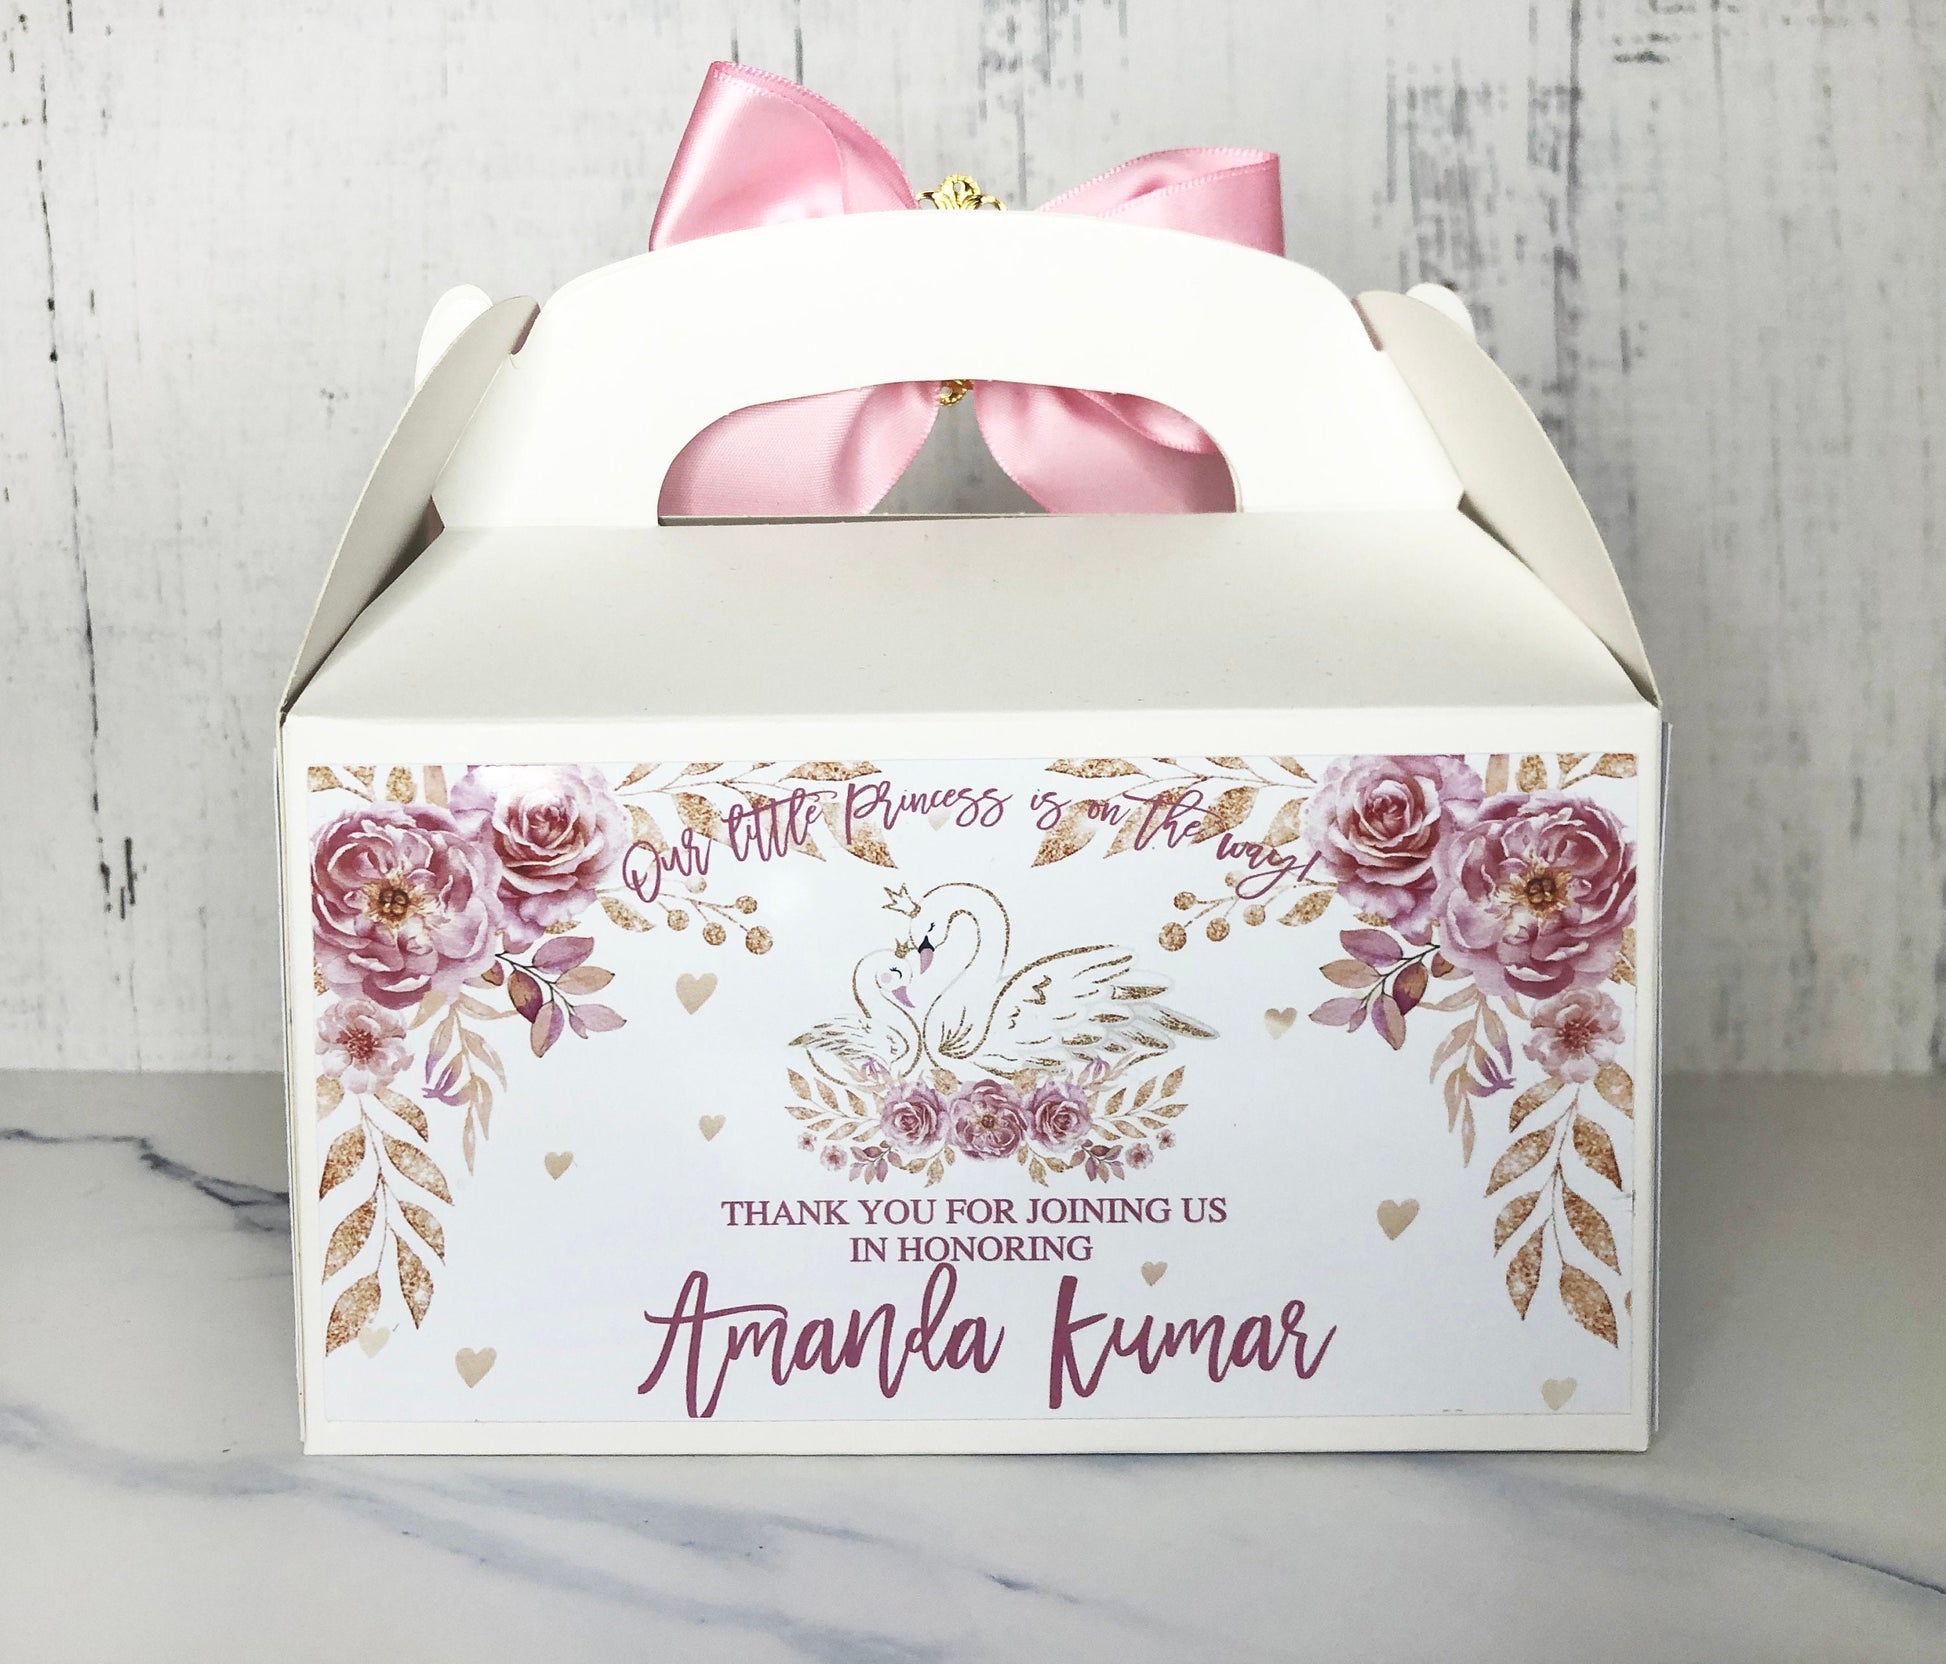 Luxury Swan Party Gable Box, Luxury Swan Decoration, Swan Baby Shower, Luxury goodie bags, Luxury favor boxes